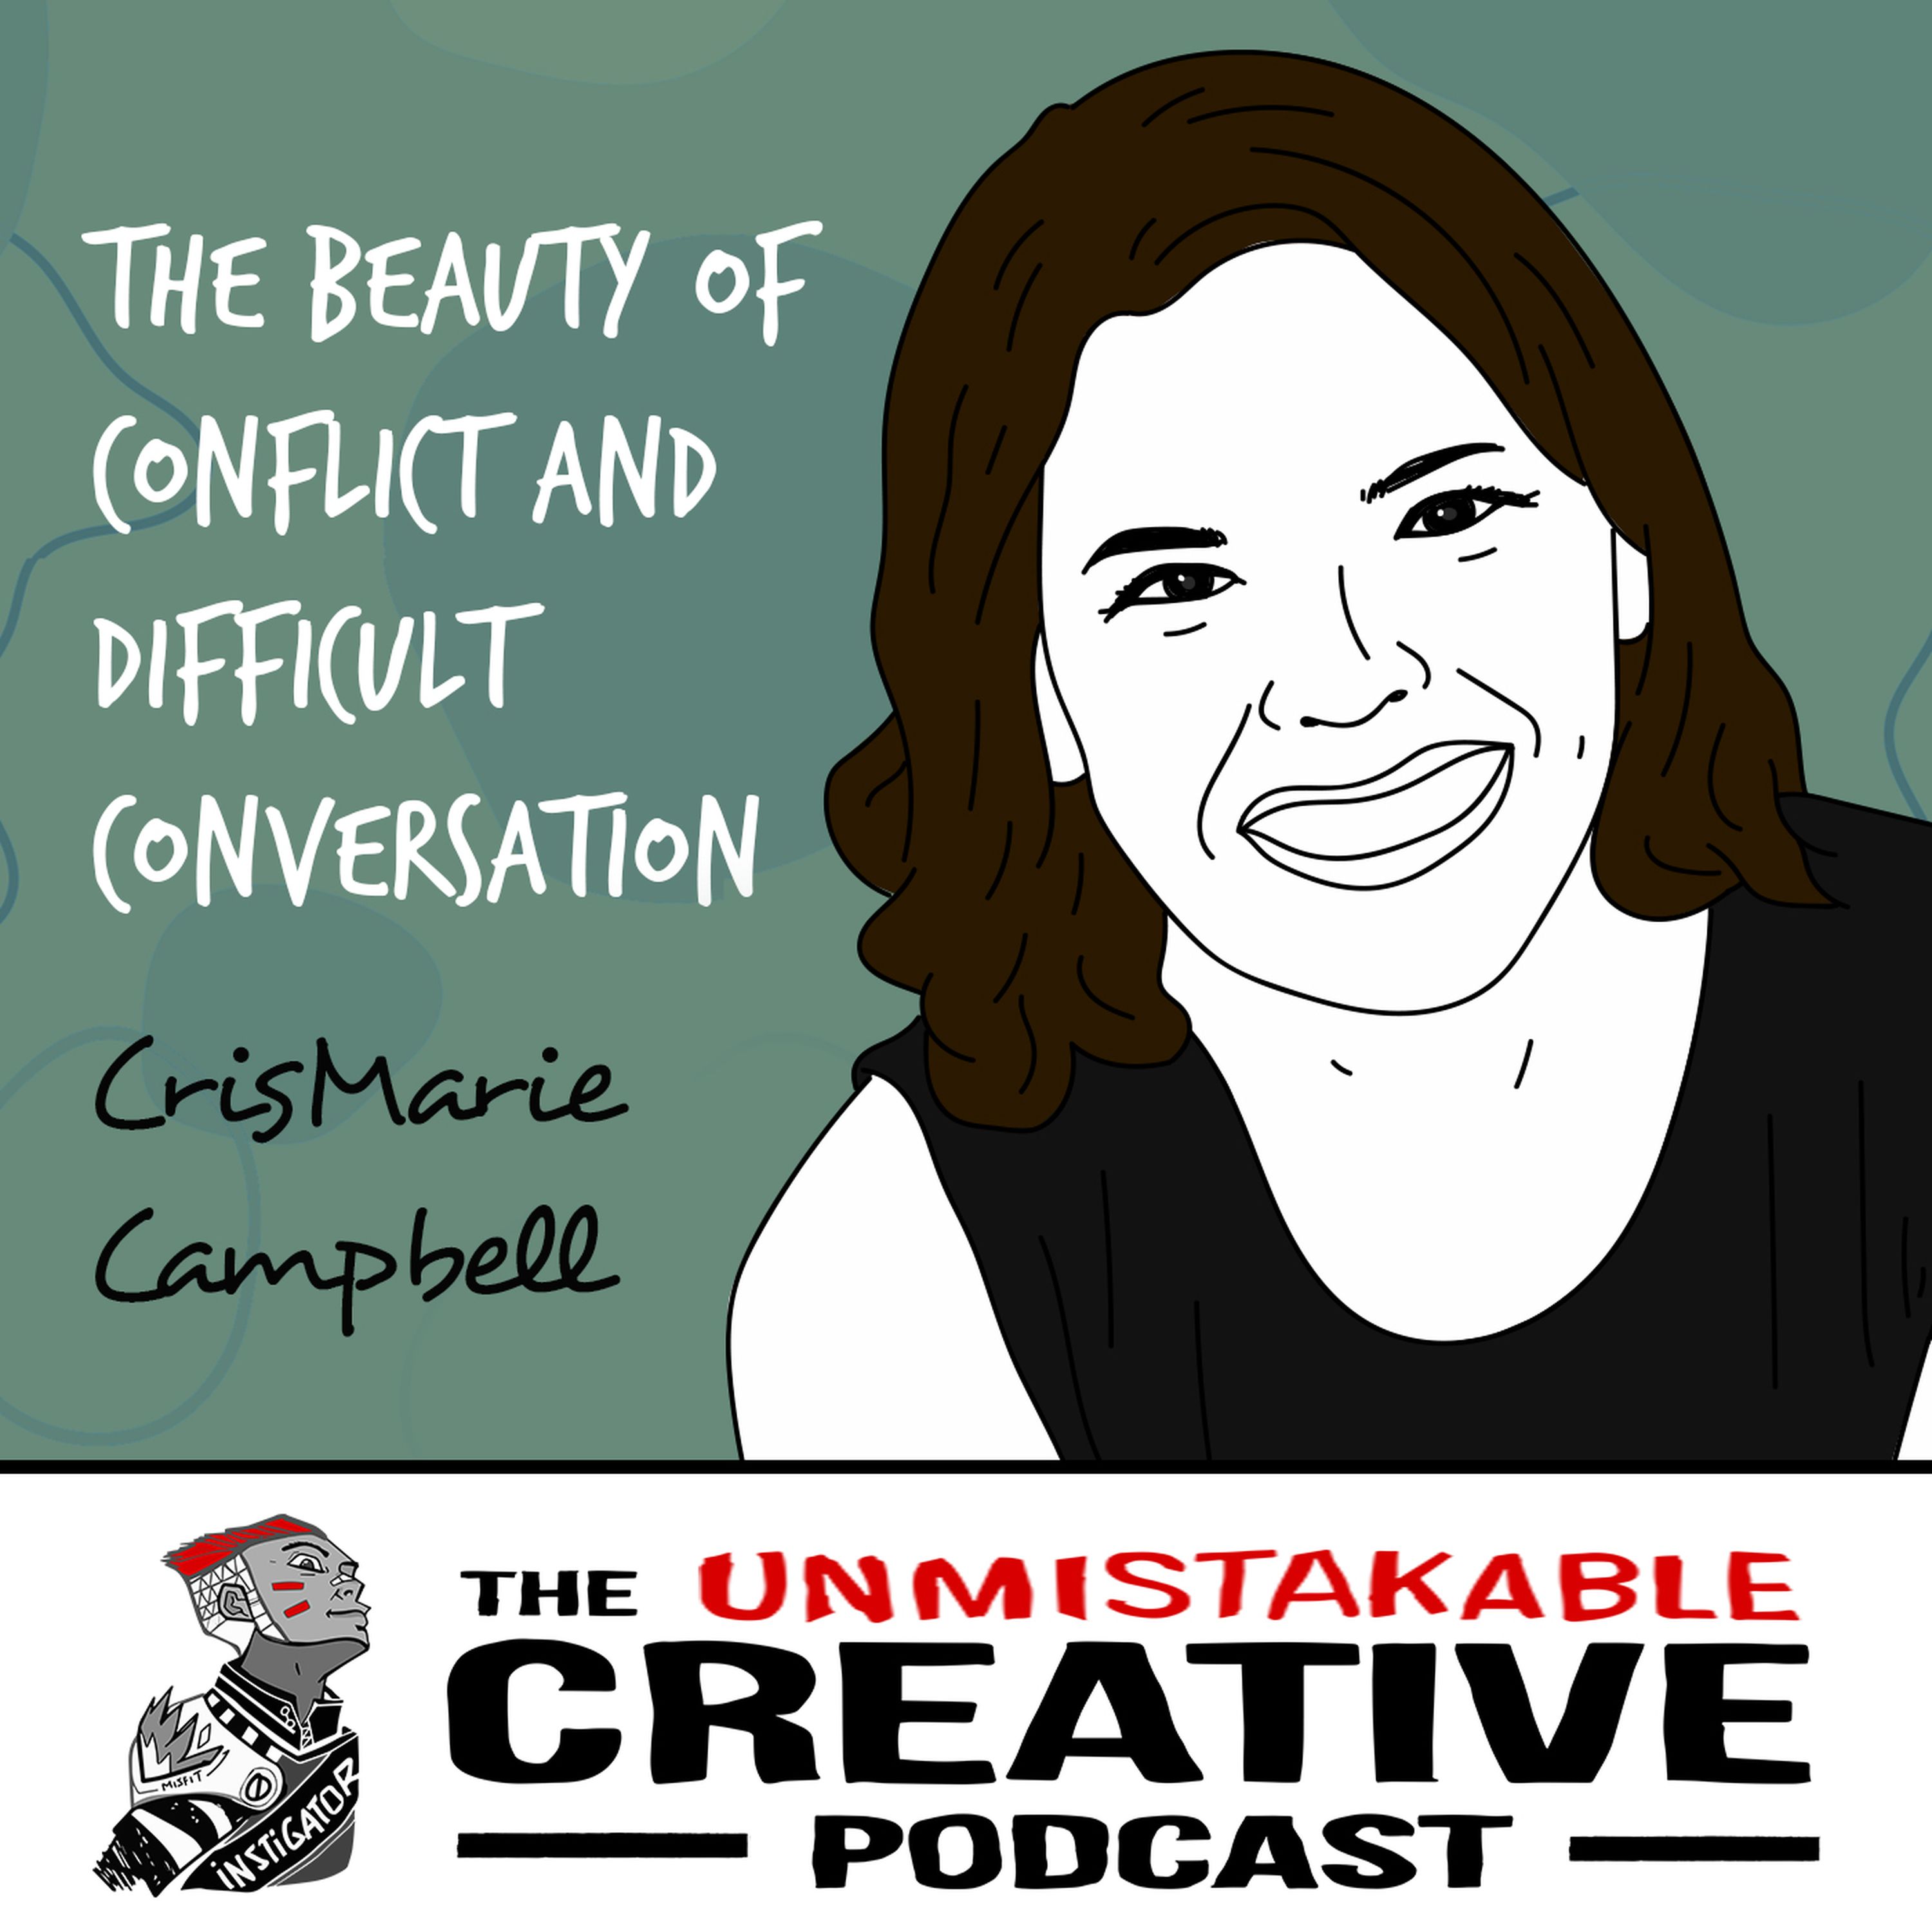 CrisMarie Campbell: The Beauty of Conflict and Difficult Conversation Image